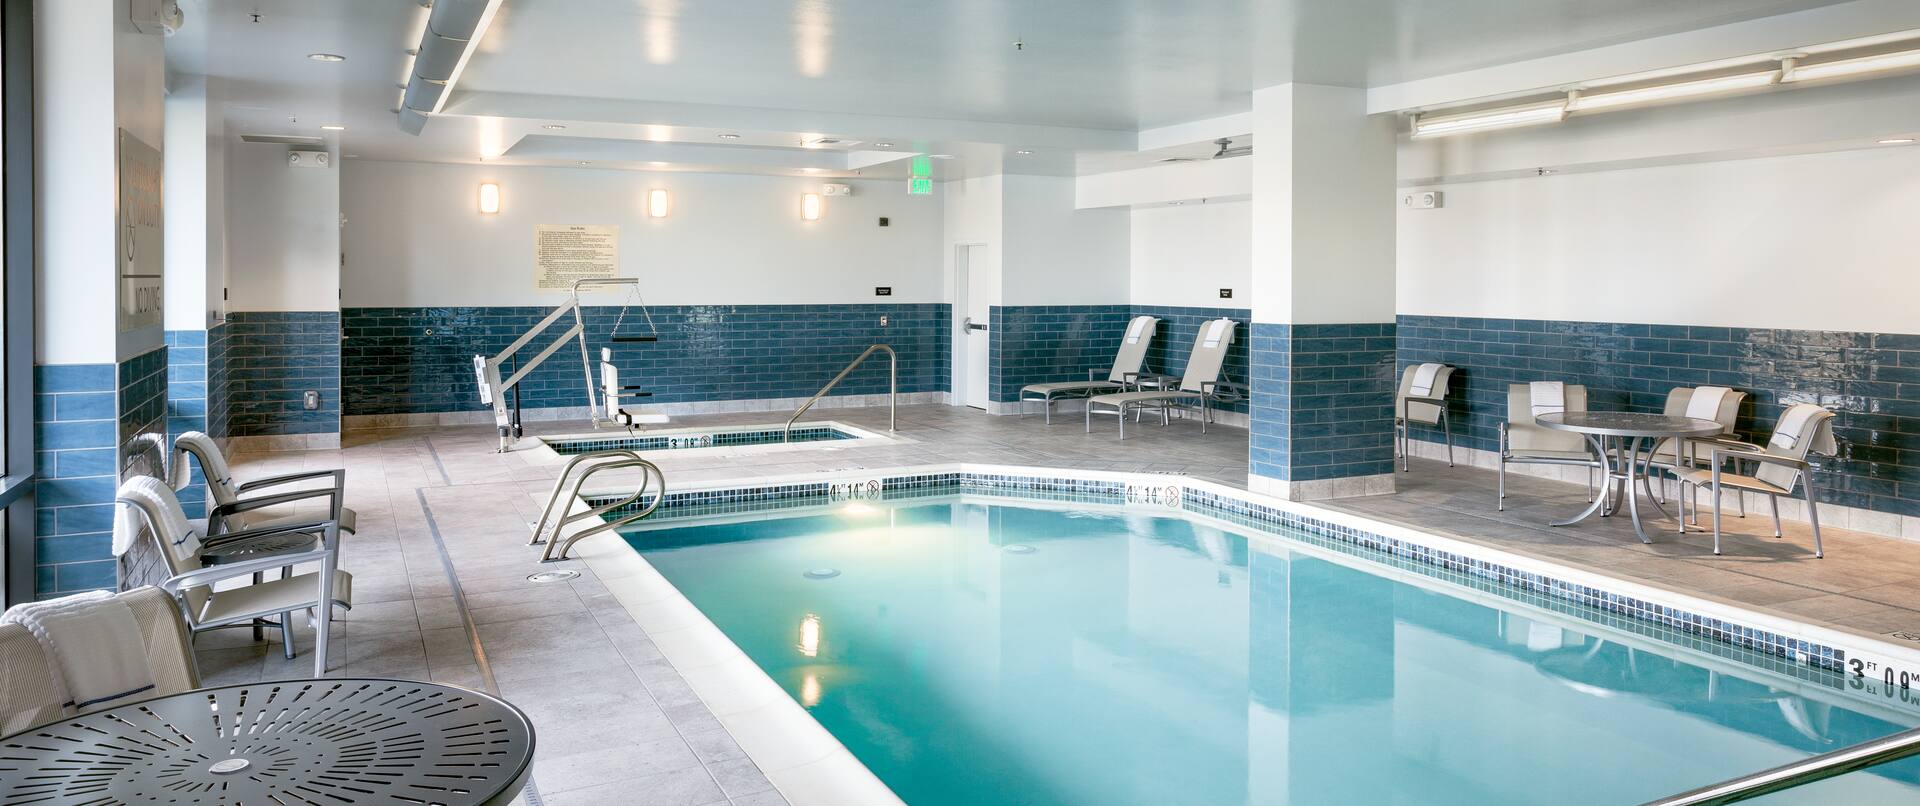 Indoor Pool and Lounge Seating